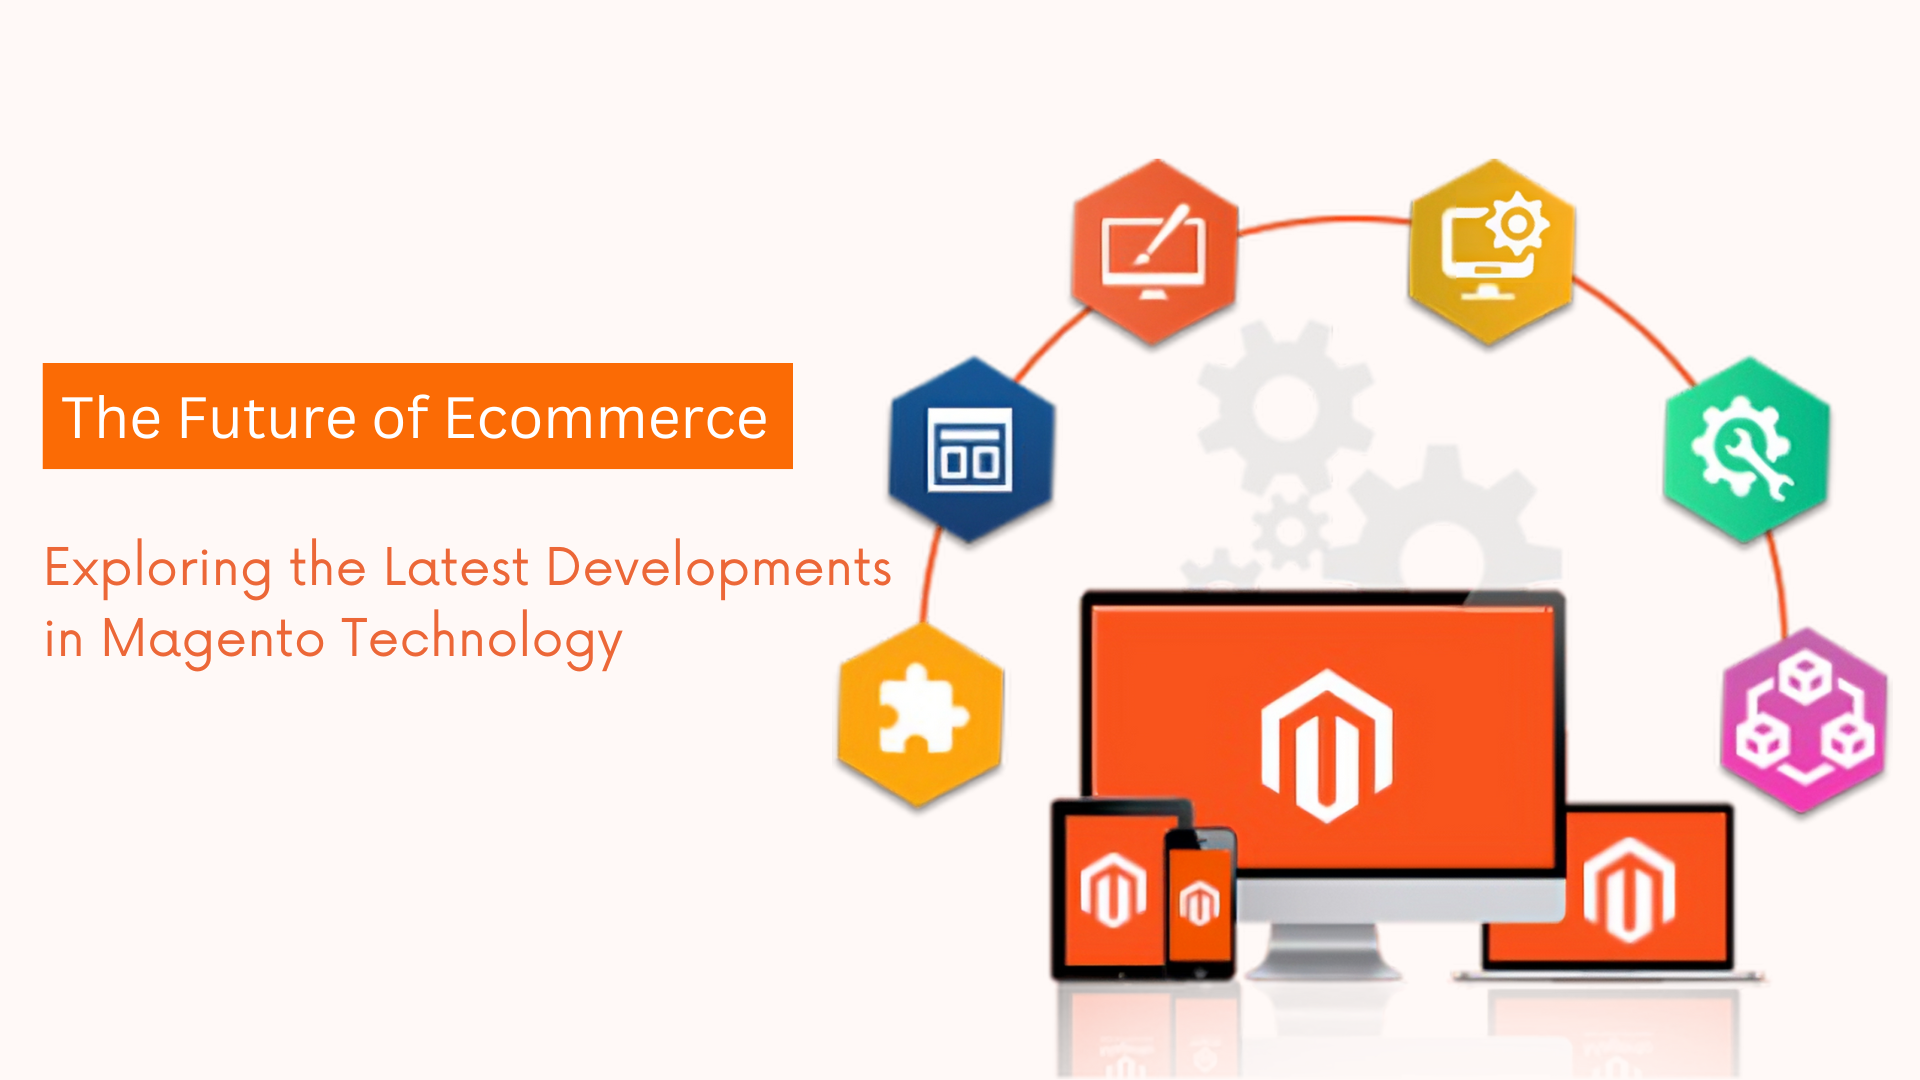 Exploring the Latest Developments in Magento Technology